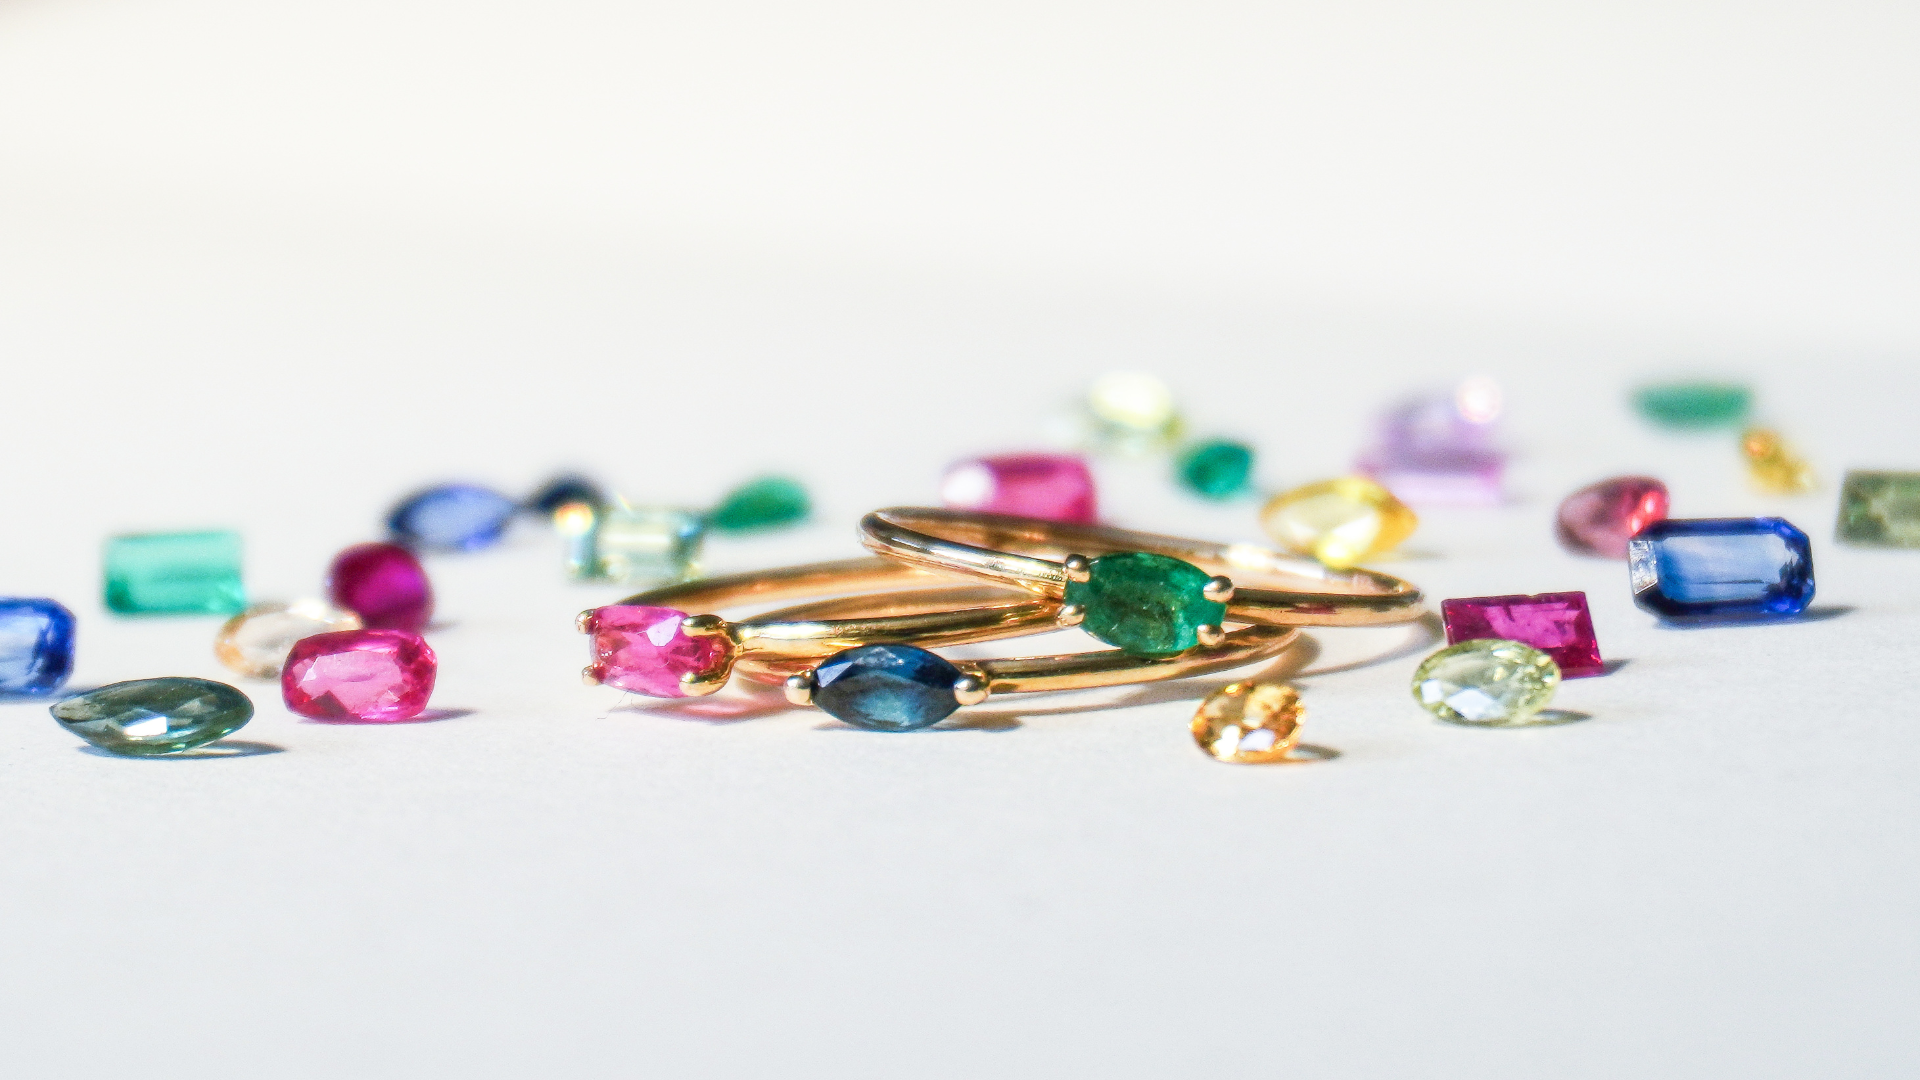 Solid Gold and Precious Gemstones: Reimagined by 'KIN